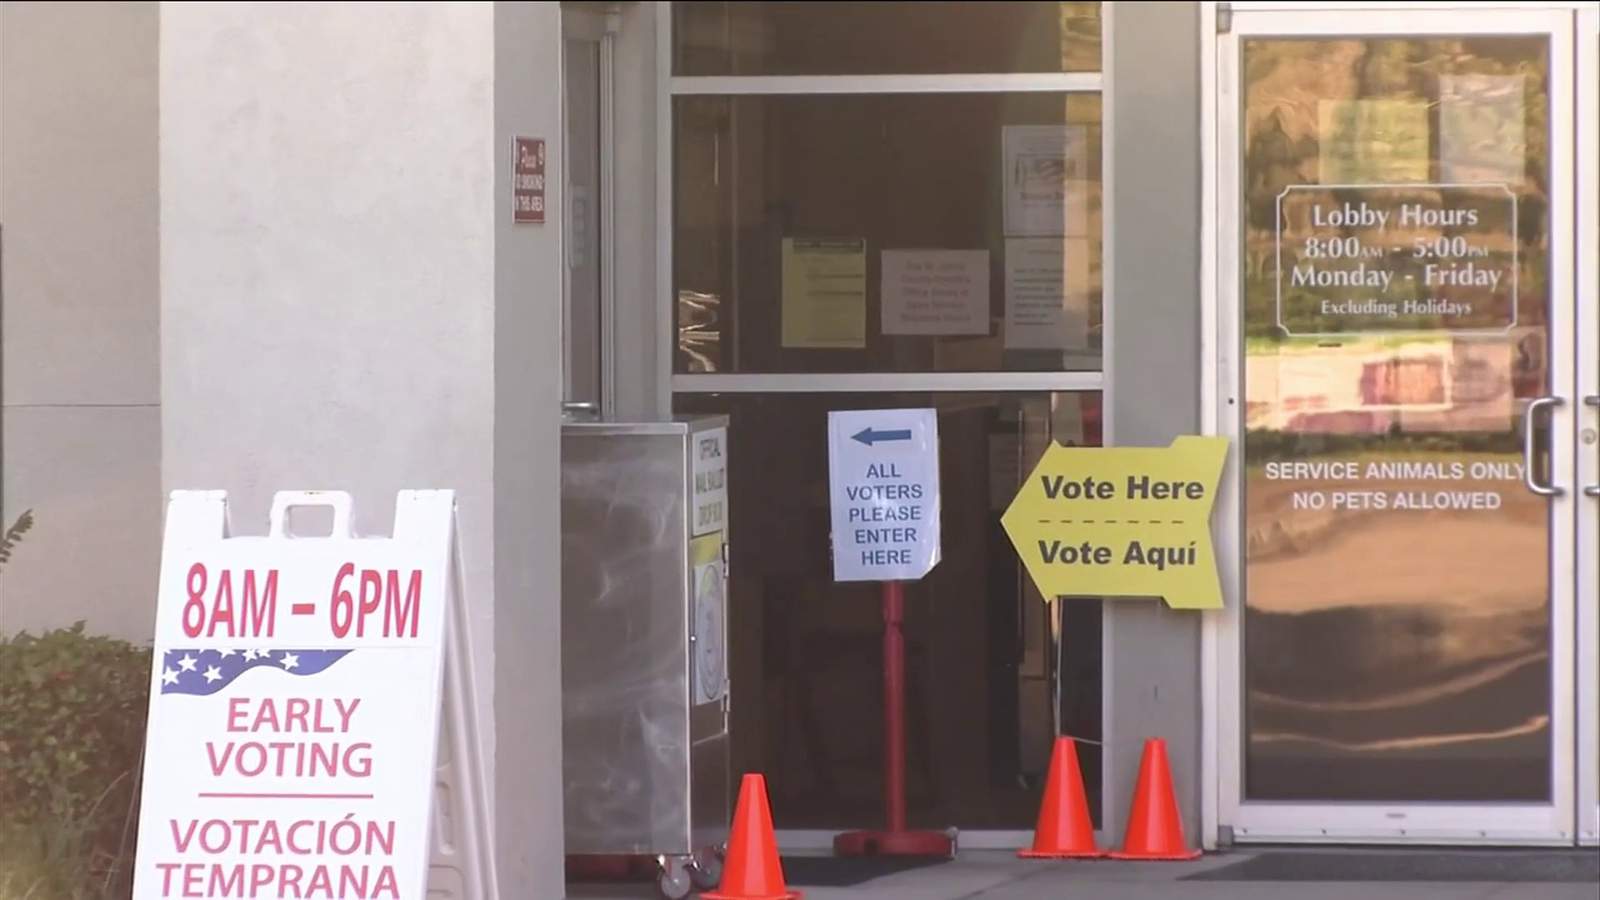 2 of St. Johns County’s longest serving poll clerks gear up for busy Election Day